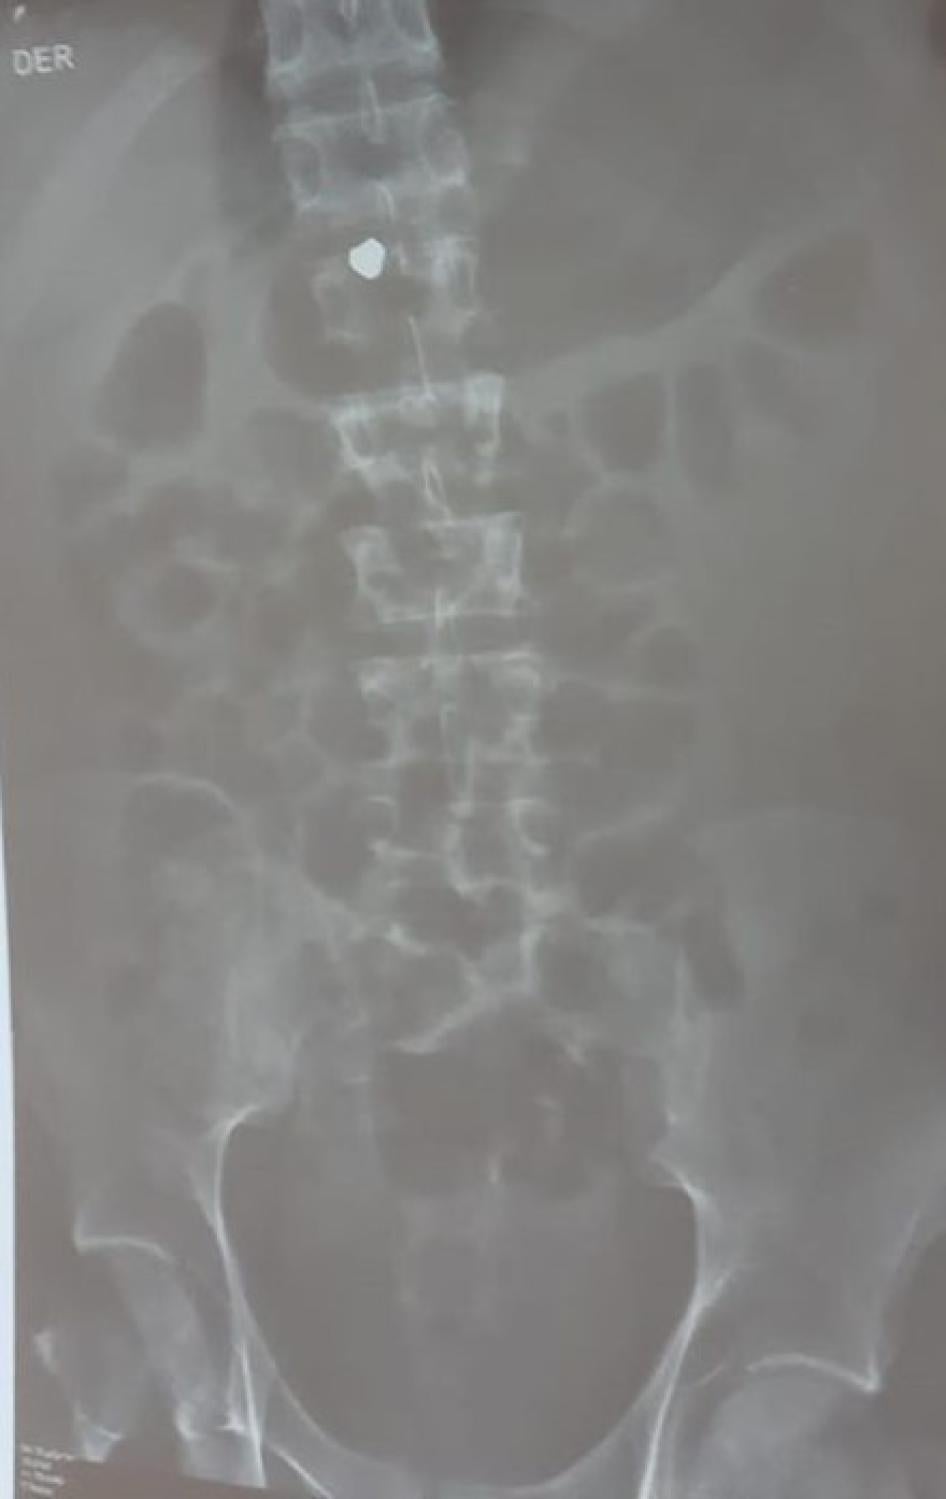 X-ray showing a pellet, believed to be lead, lodged in Jon Cordero’s spinal cord. Photograph courtesy of Jon Cordero’s family.